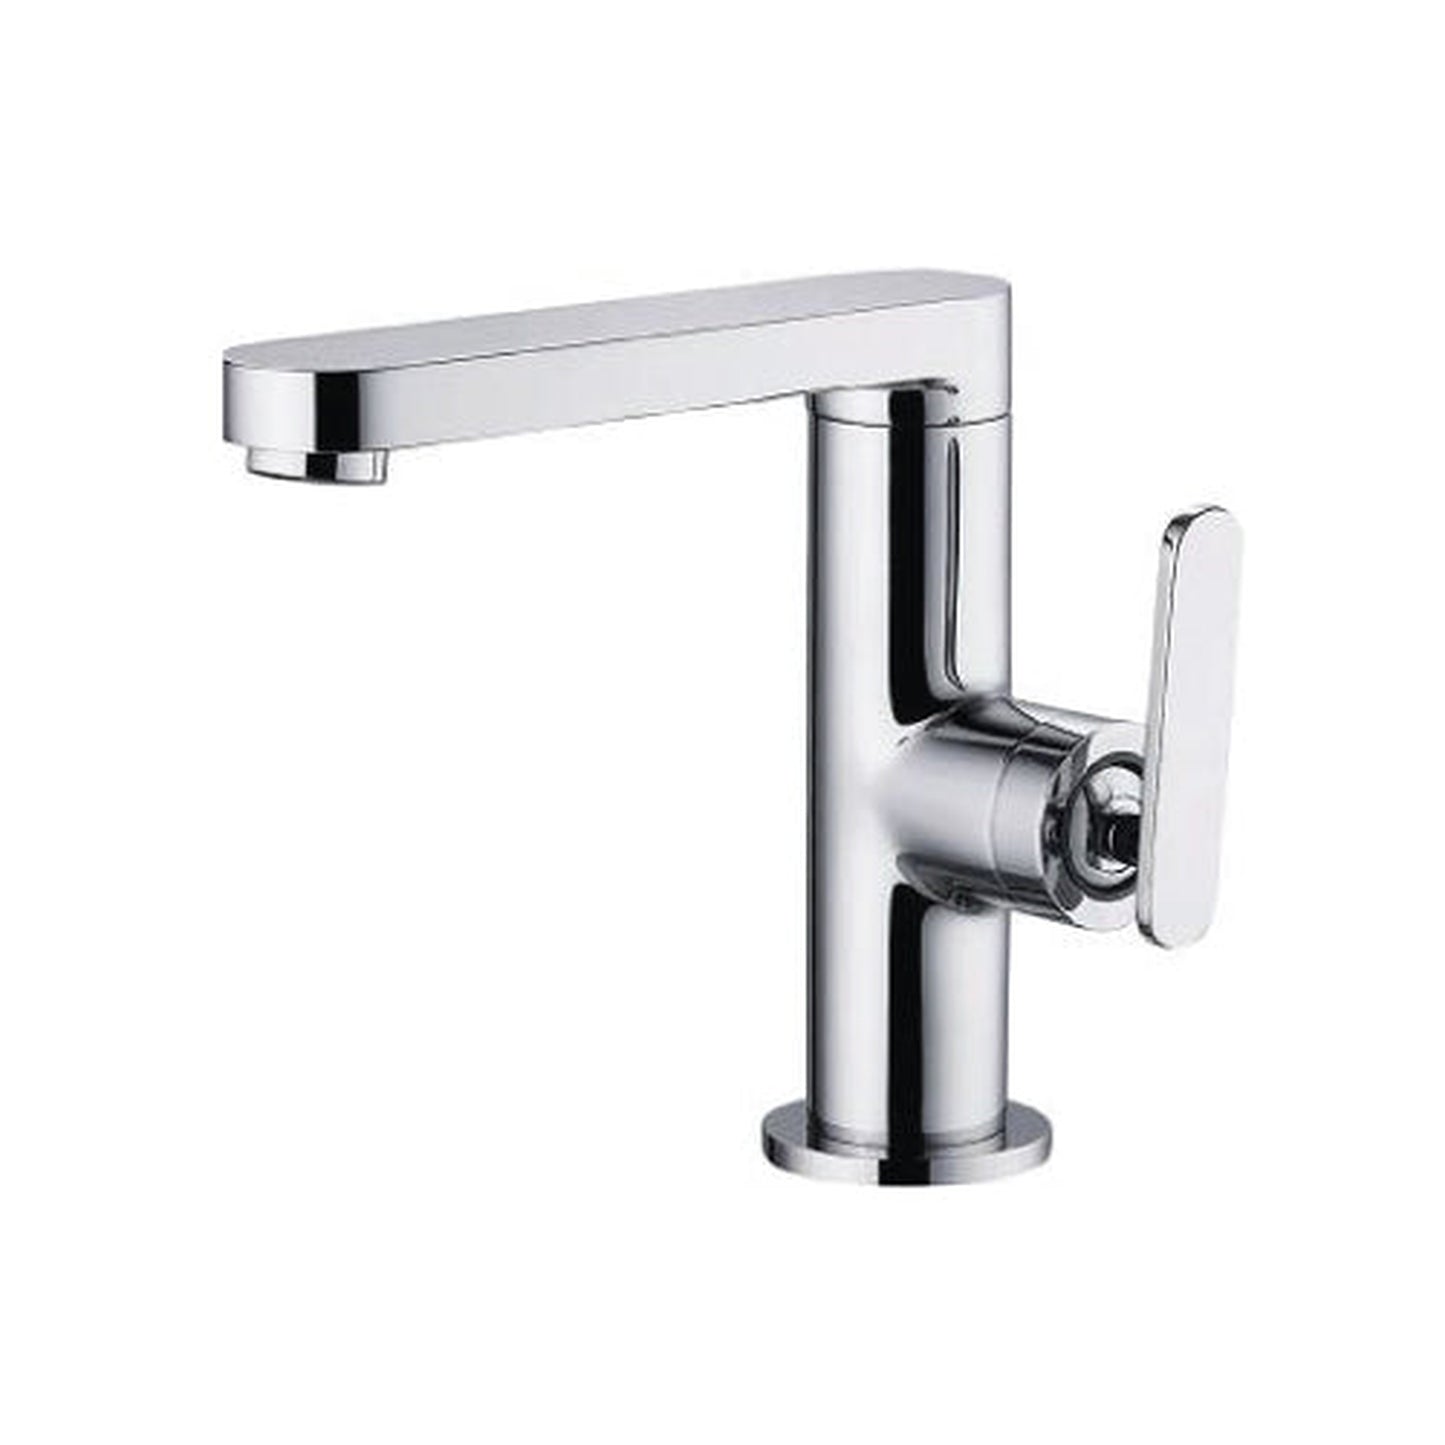 Isenberg Serie 110 6" Single-Hole Brushed Nickel PVD Deck-Mounted Bathroom Sink Faucet With Pop-Up Drain